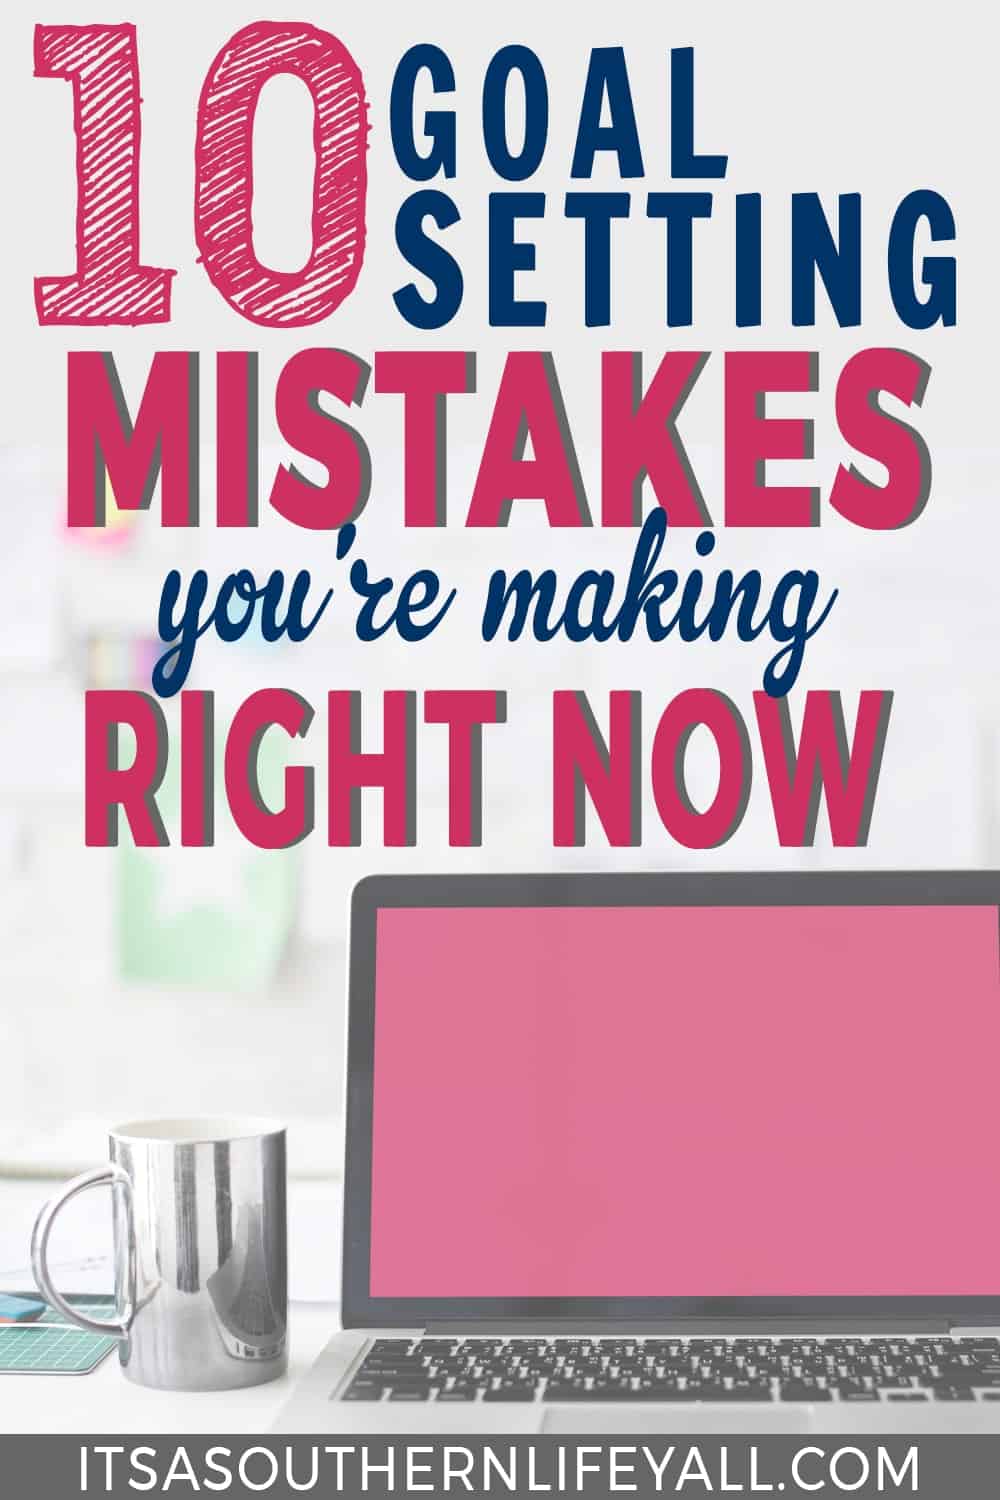 Computer with coffee cup on desk with 10 Goal Setting Mistakes you're making right now.